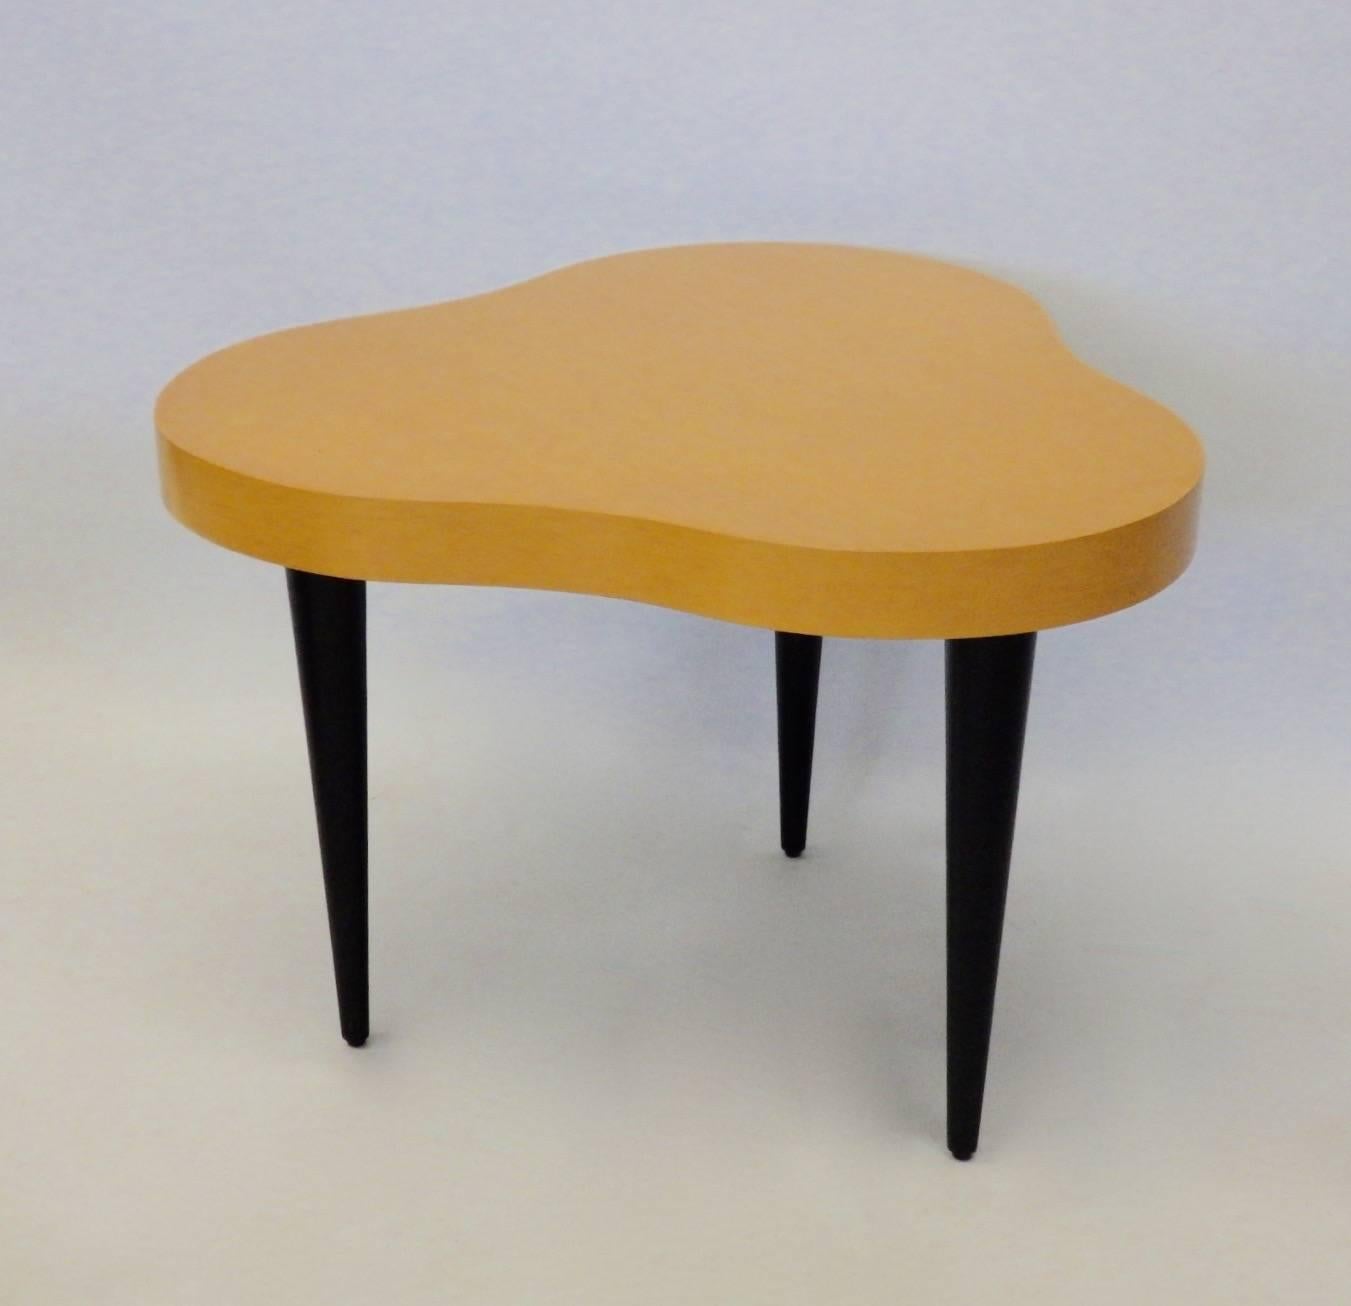 Nicely refinished biomorphic top table in the style of Gilbert Rohde for Herman Miller cloud table series .